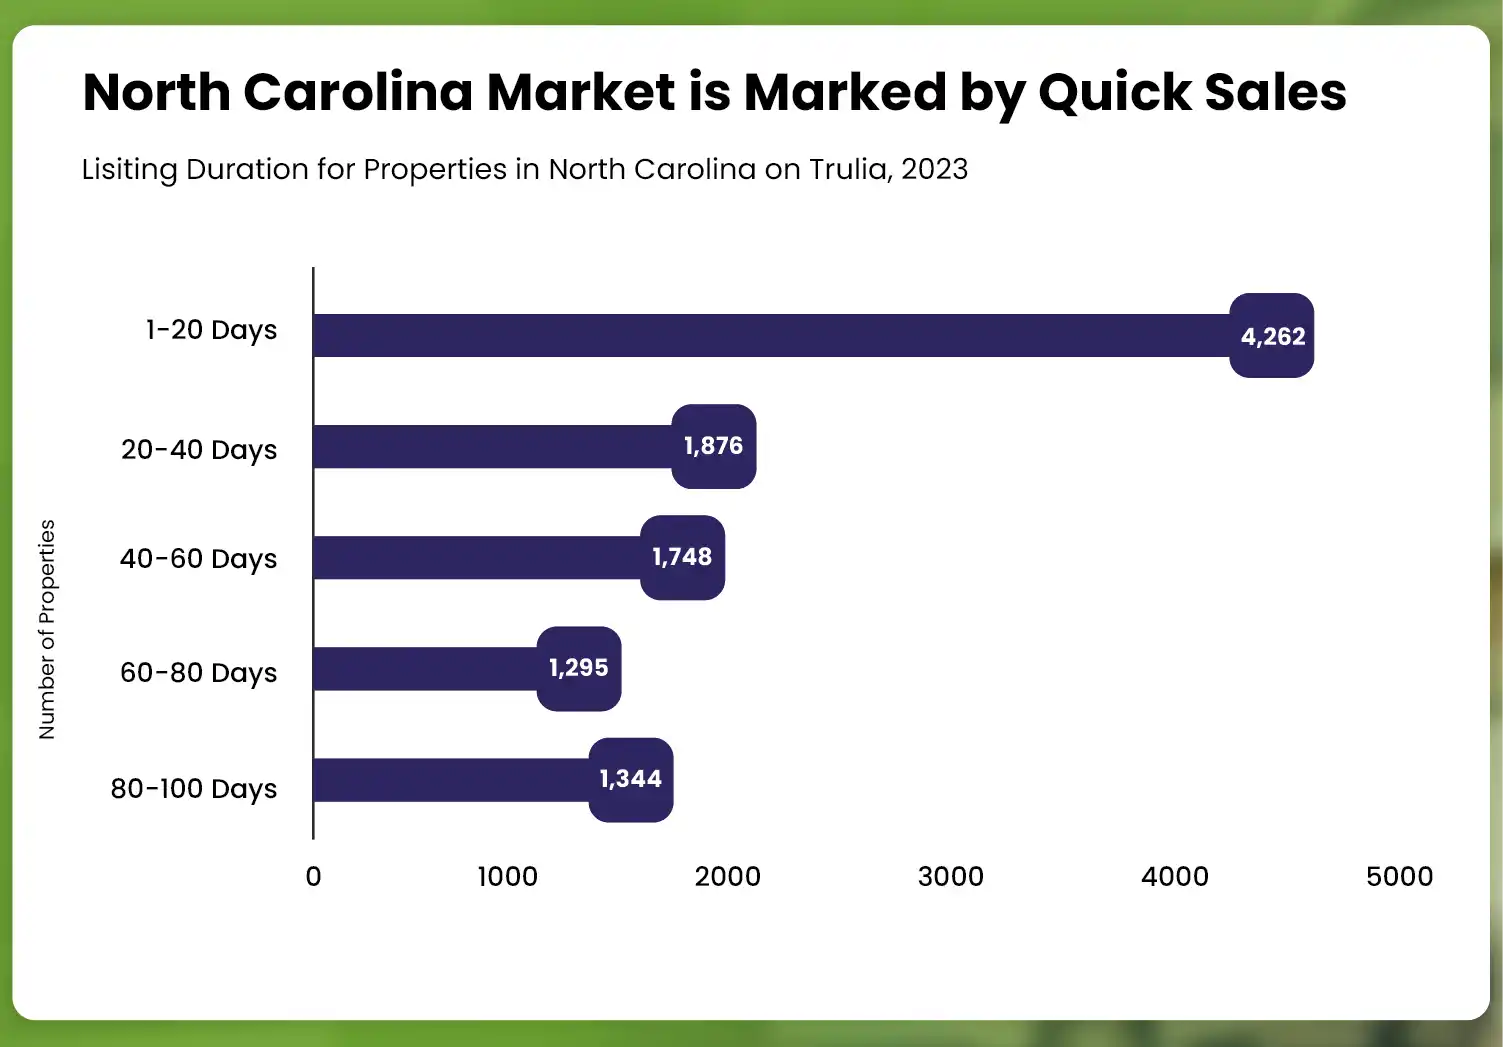 Insights-from-Trulia-Market-Data-Analysis-Listing-Durations-of-Properties-in-North-Carolina-01